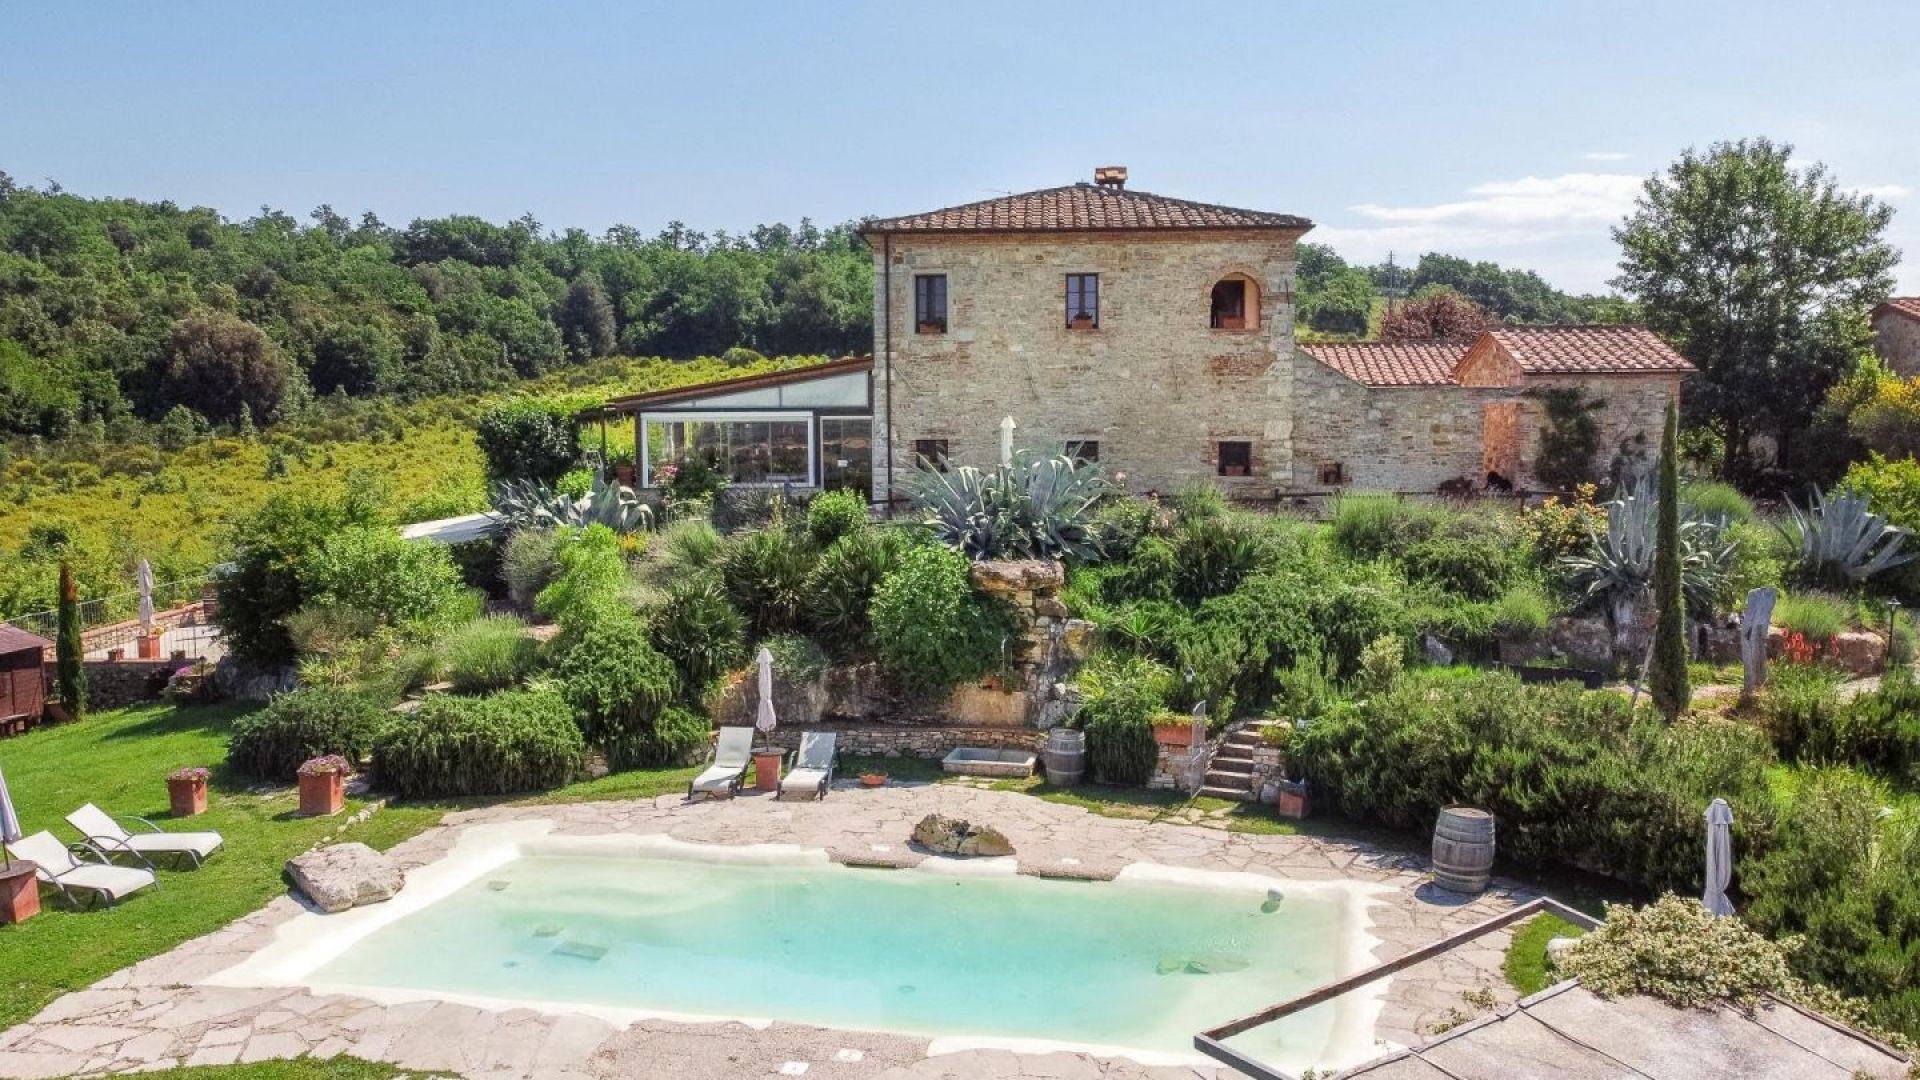 For sale cottage in  Rapolano Terme Toscana